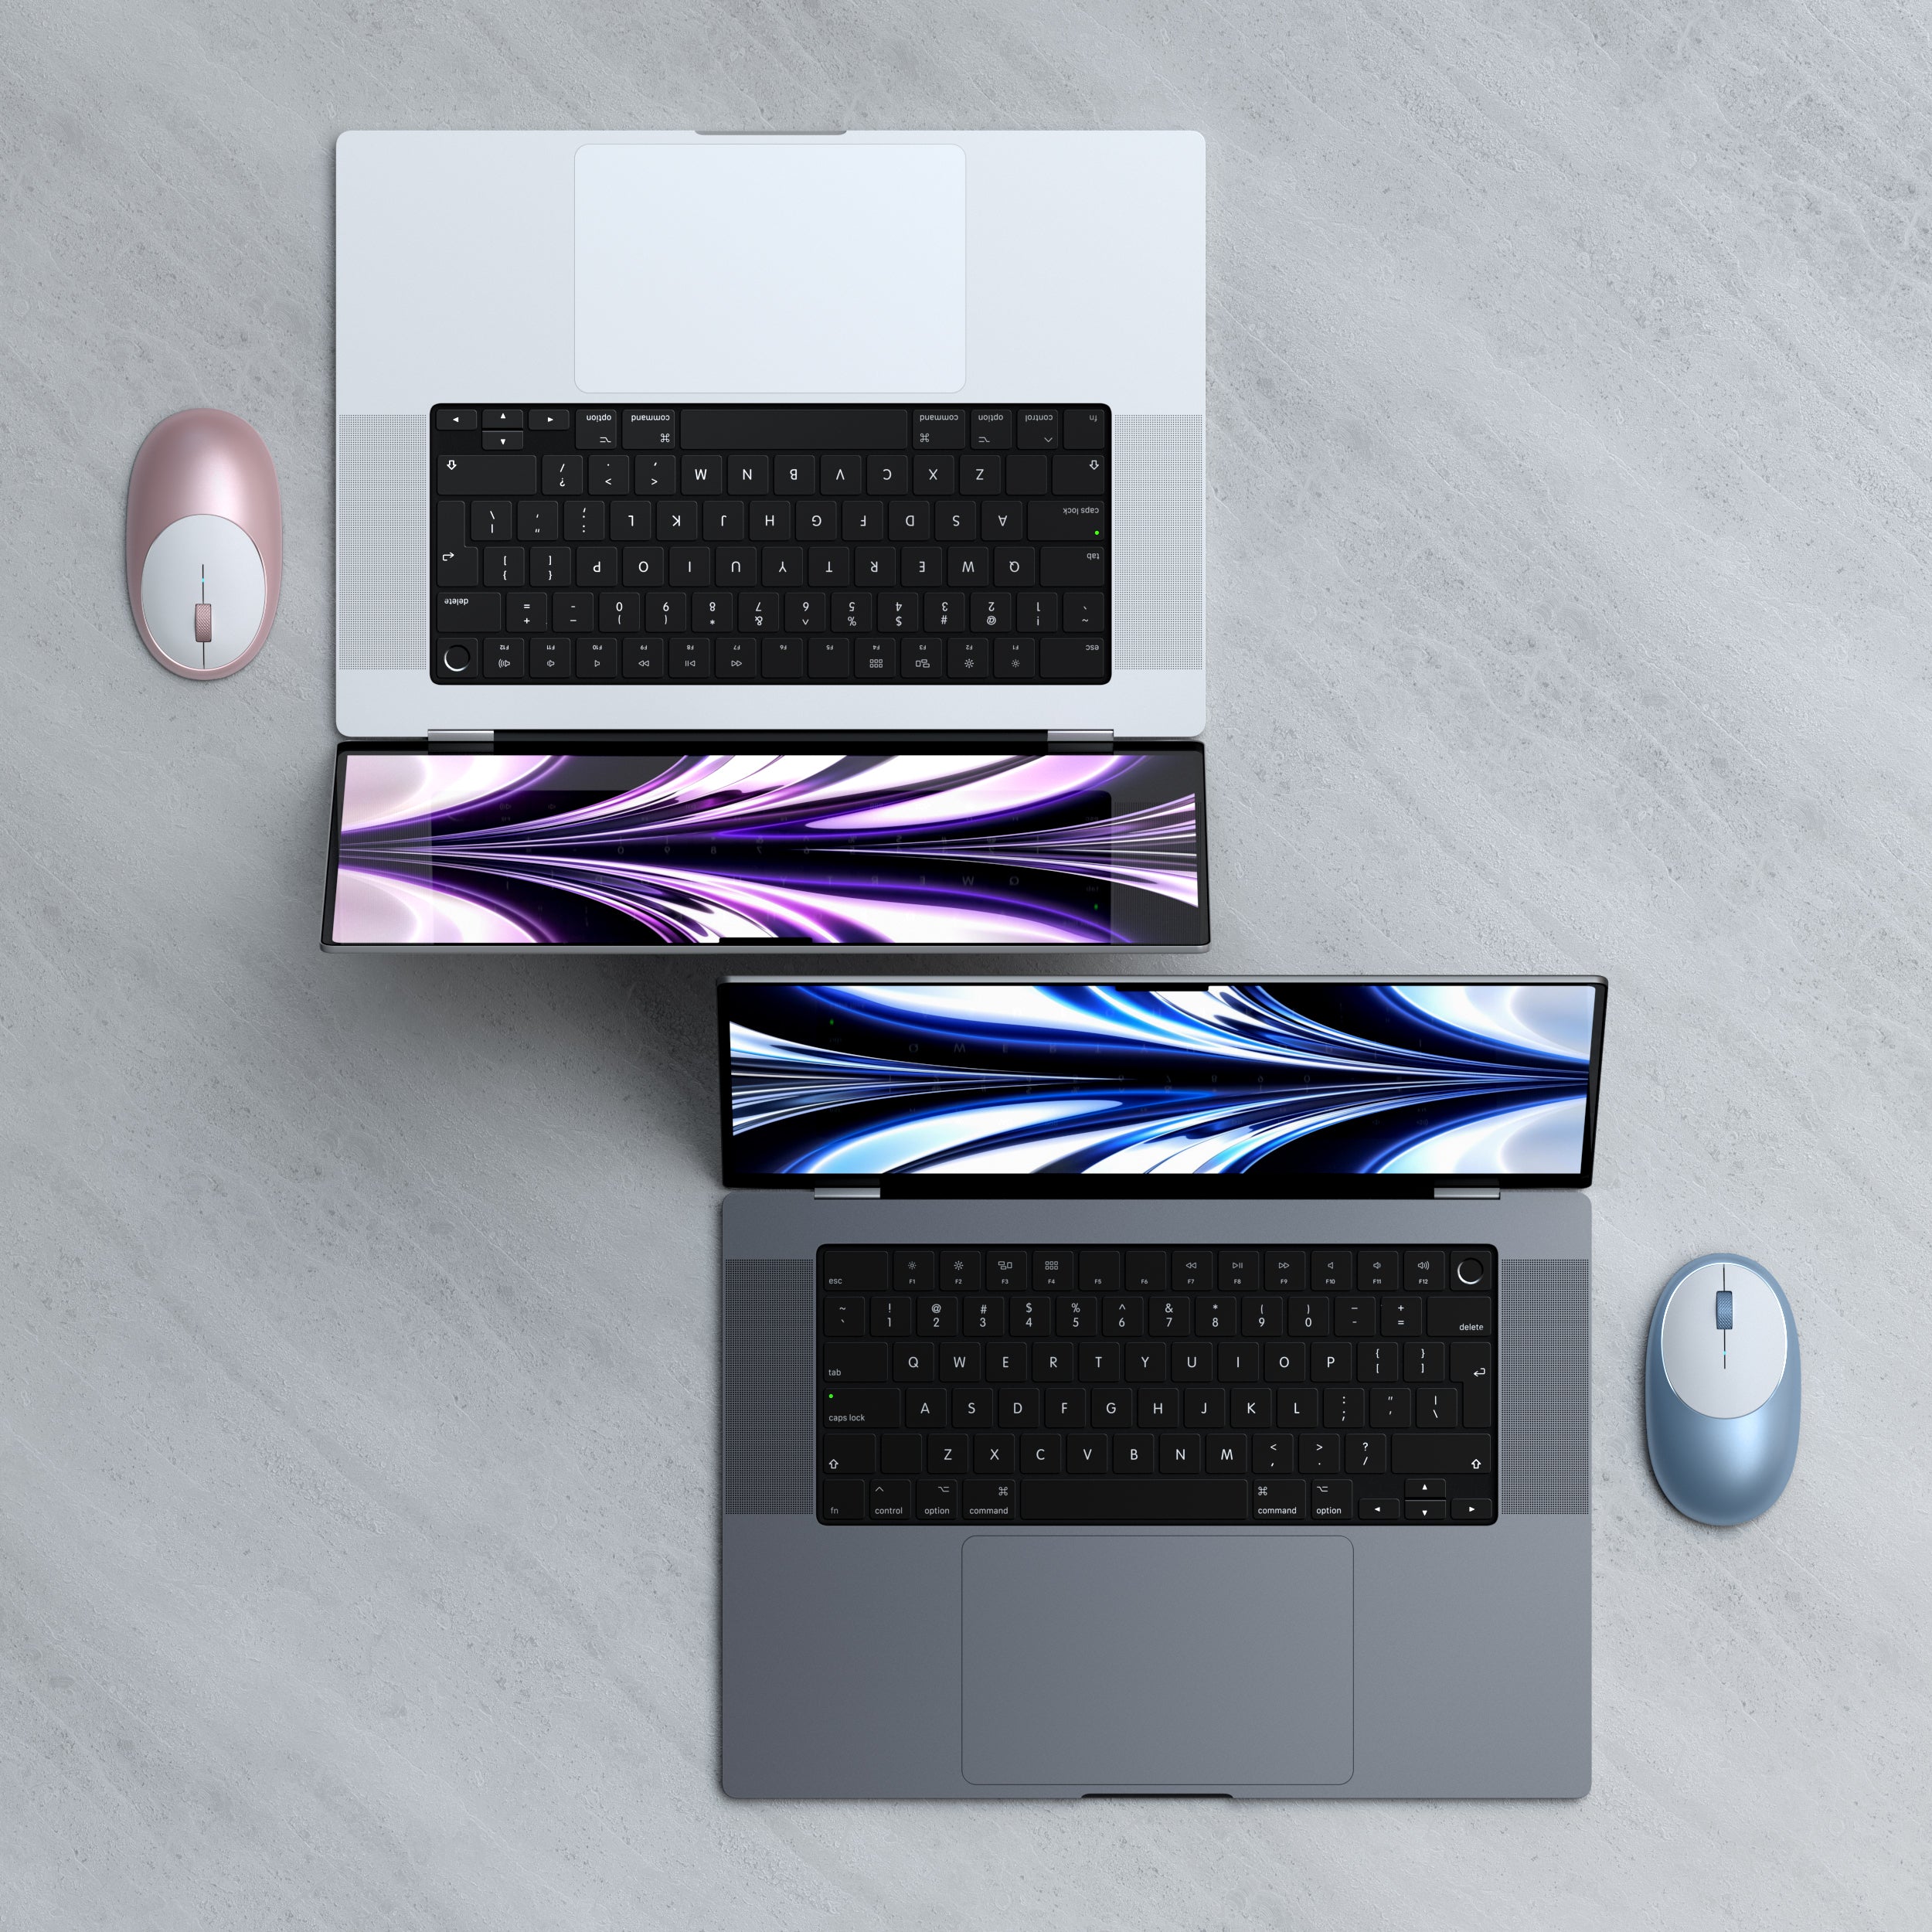 Complete your desktop with the Satechi M1 Bluetooth Mouse, featuring Bluetooth 4.0 connection, rechargeable Type-C port and modern, ergonomic design. Seamlessly connect to your favorite Bluetooth-enabled device for wireless control of your desktop or laptop, with a range of up to 32 ft. 